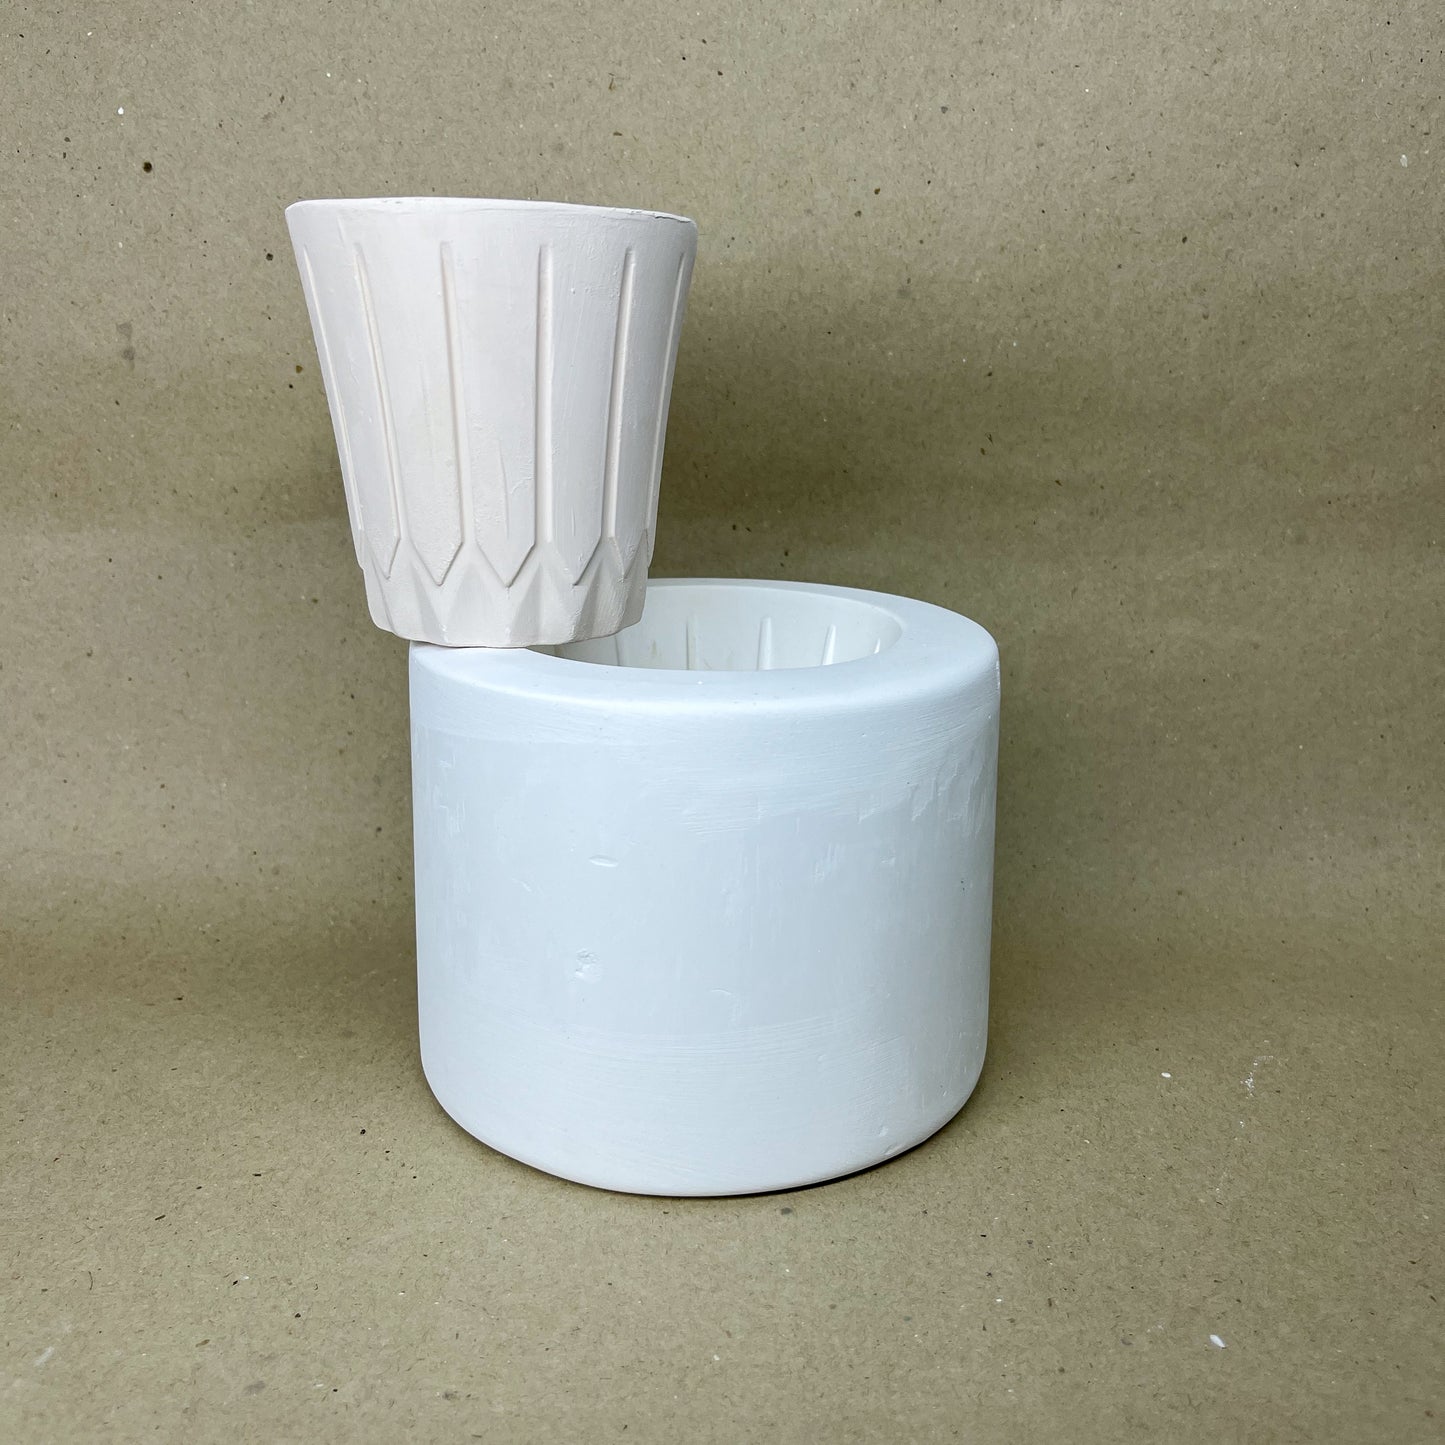 Plaster Mold - Ceramic Casting Mold - Wide-Mouthed Decorated Cup with Glaze Rim 8.5x8.5cm